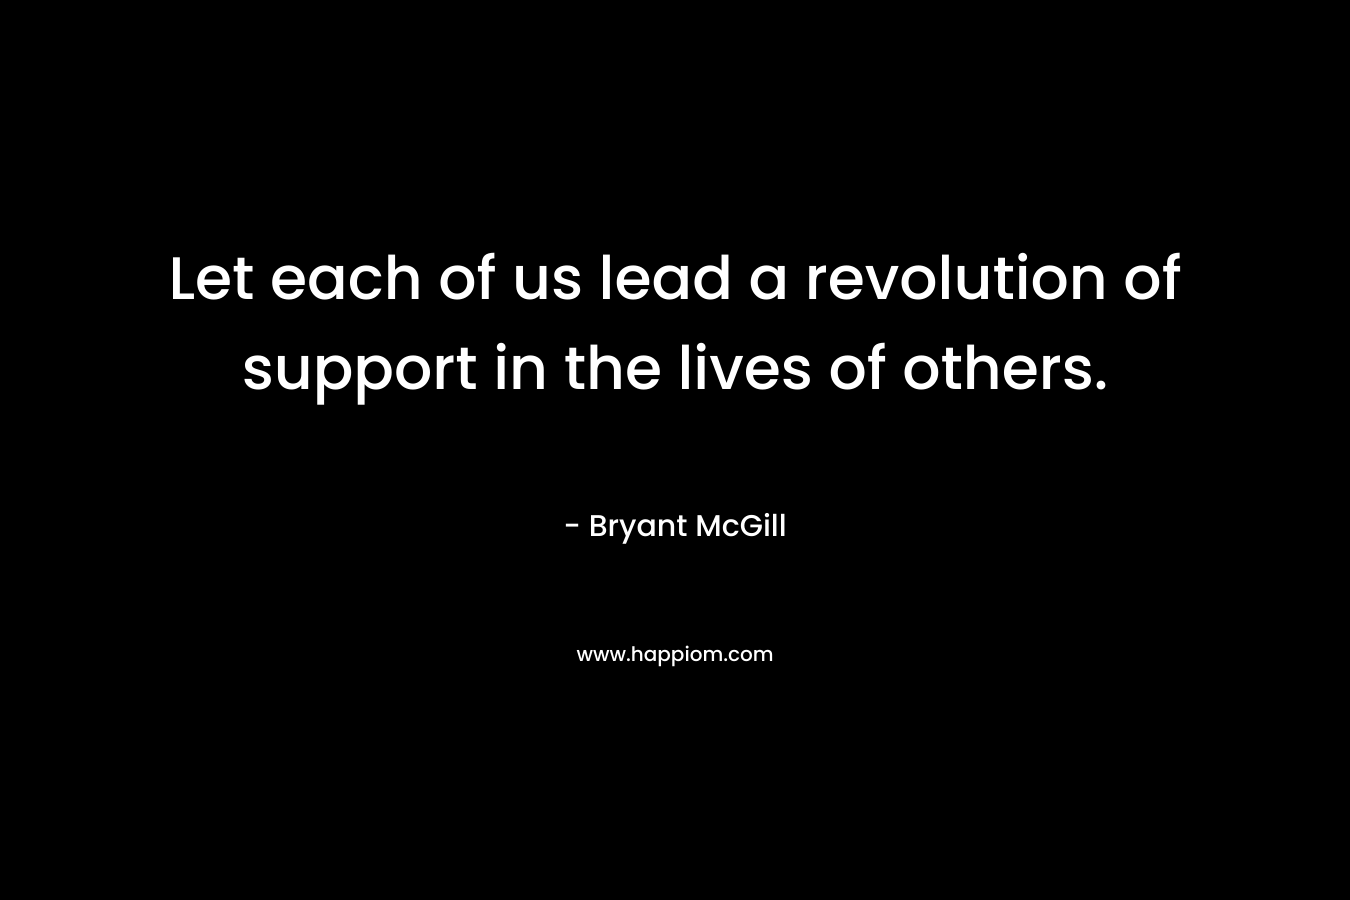 Let each of us lead a revolution of support in the lives of others. – Bryant McGill